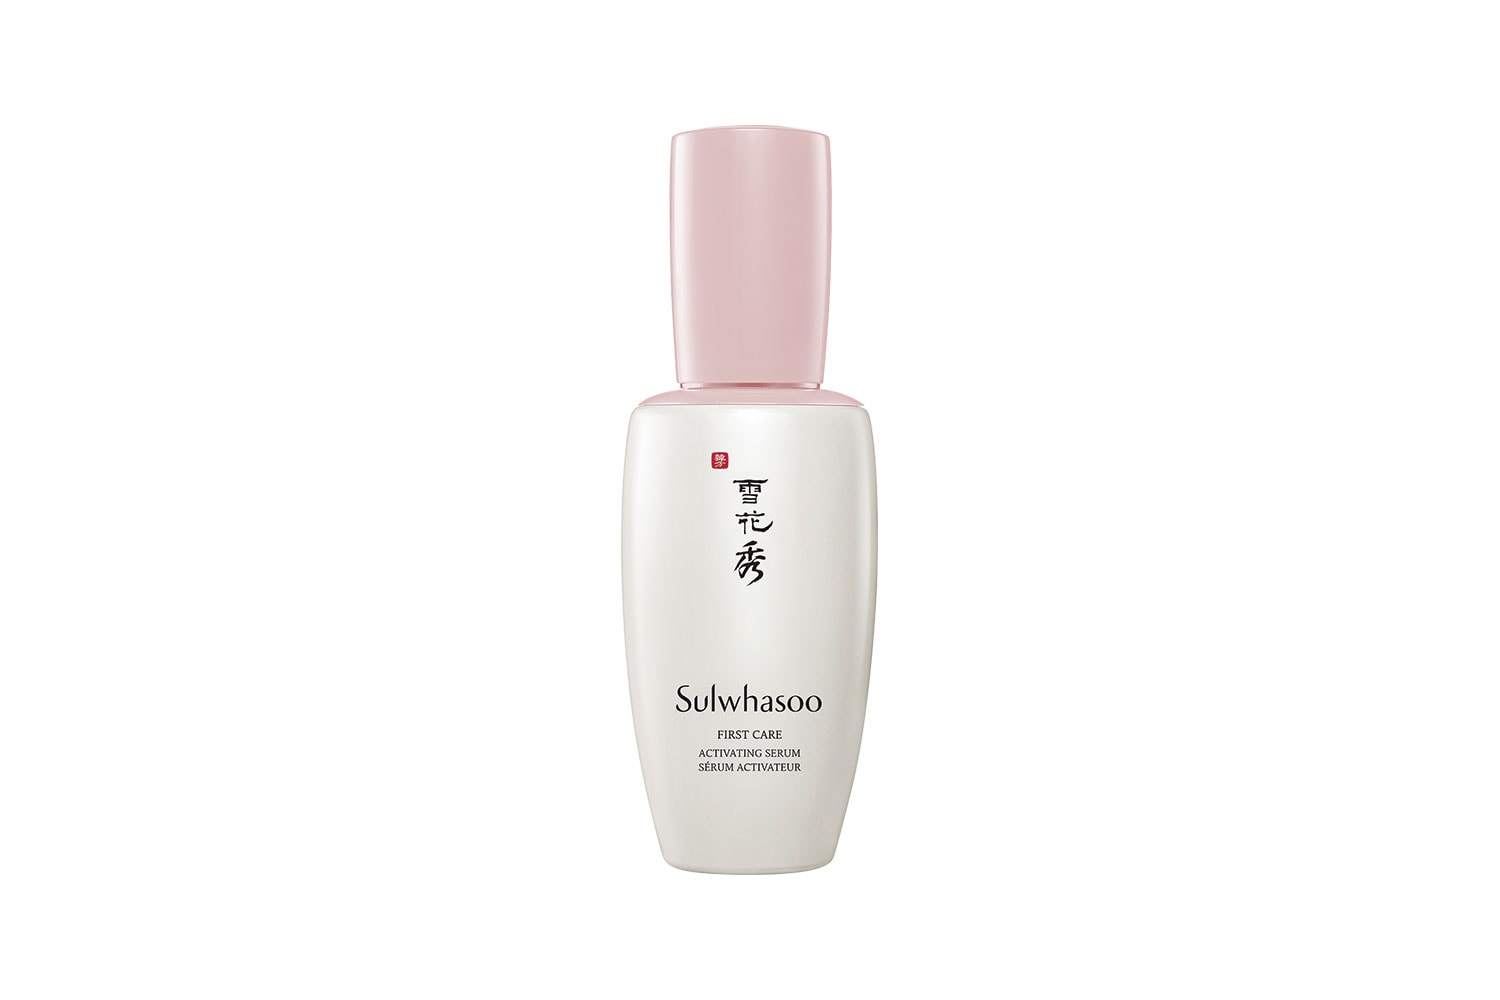 sulwhasoo first care activating serum k-beauty anti-aging new scents skincare korean brand